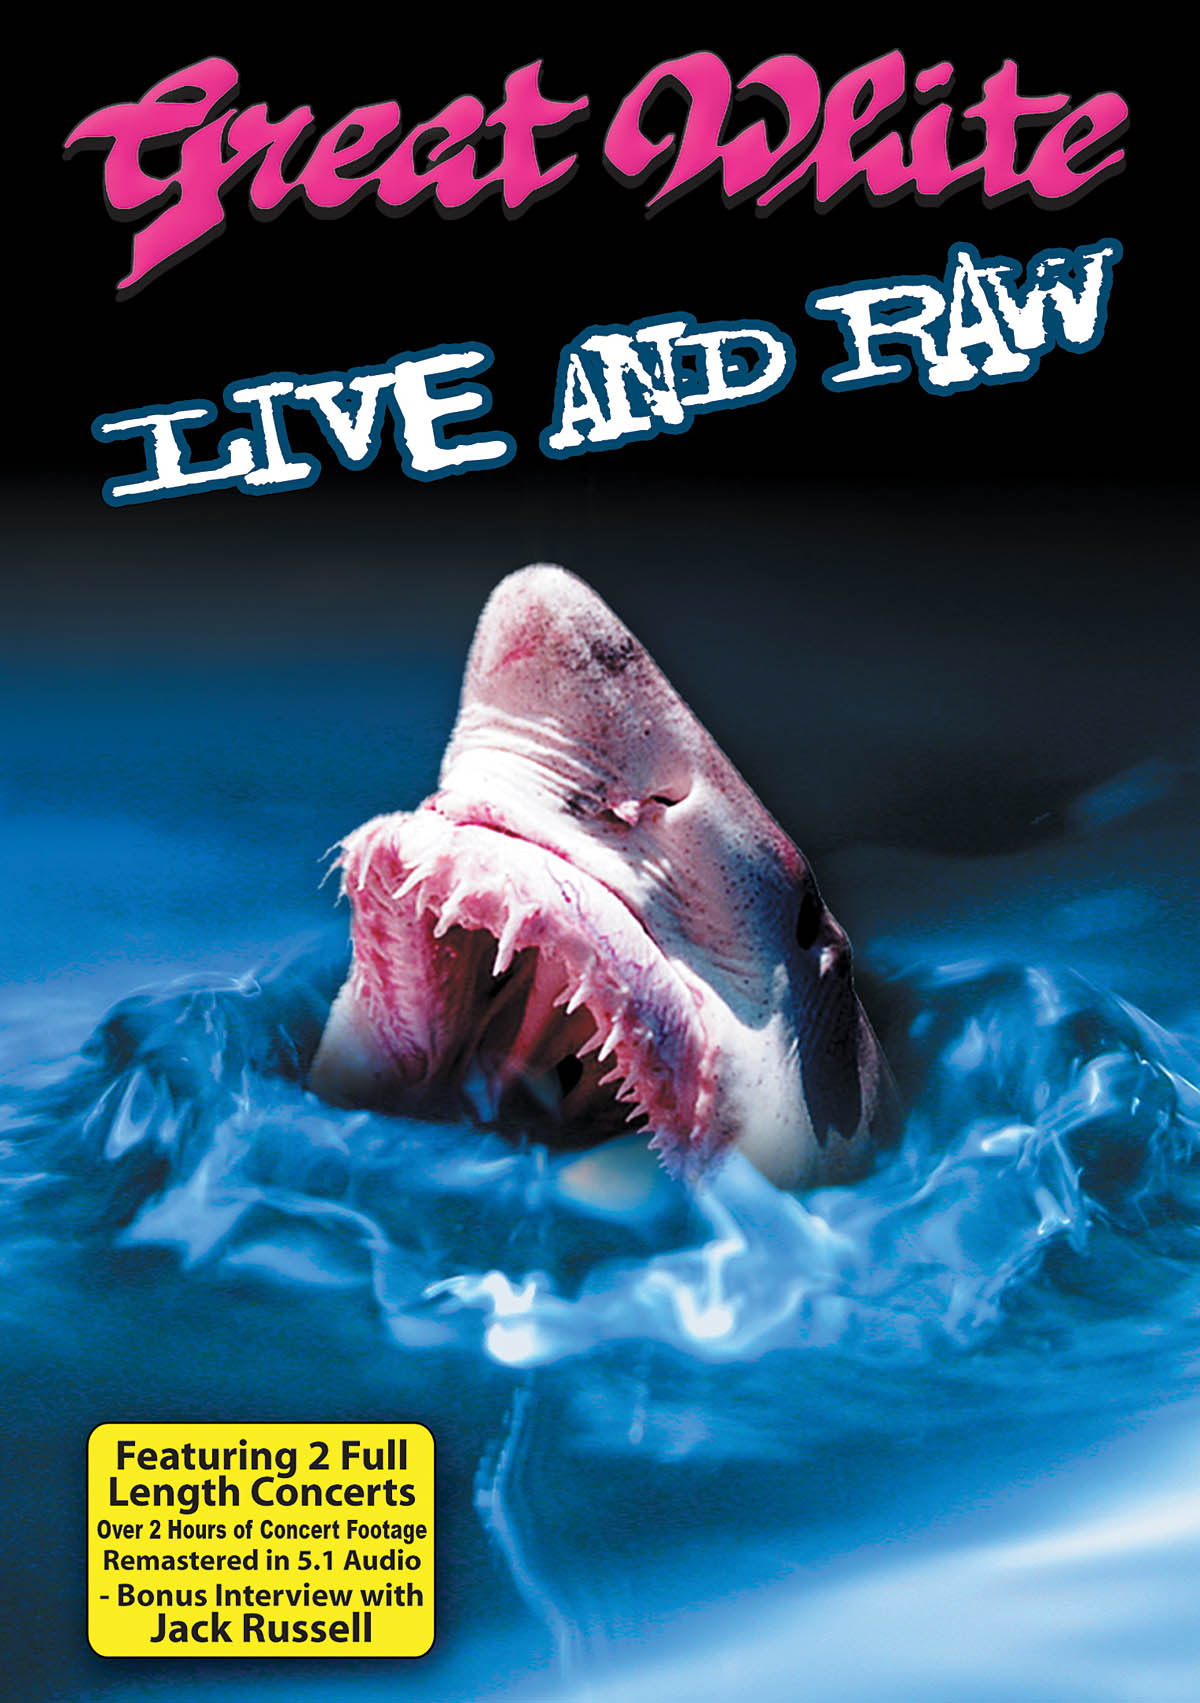 Great White - Live and Raw: DVD